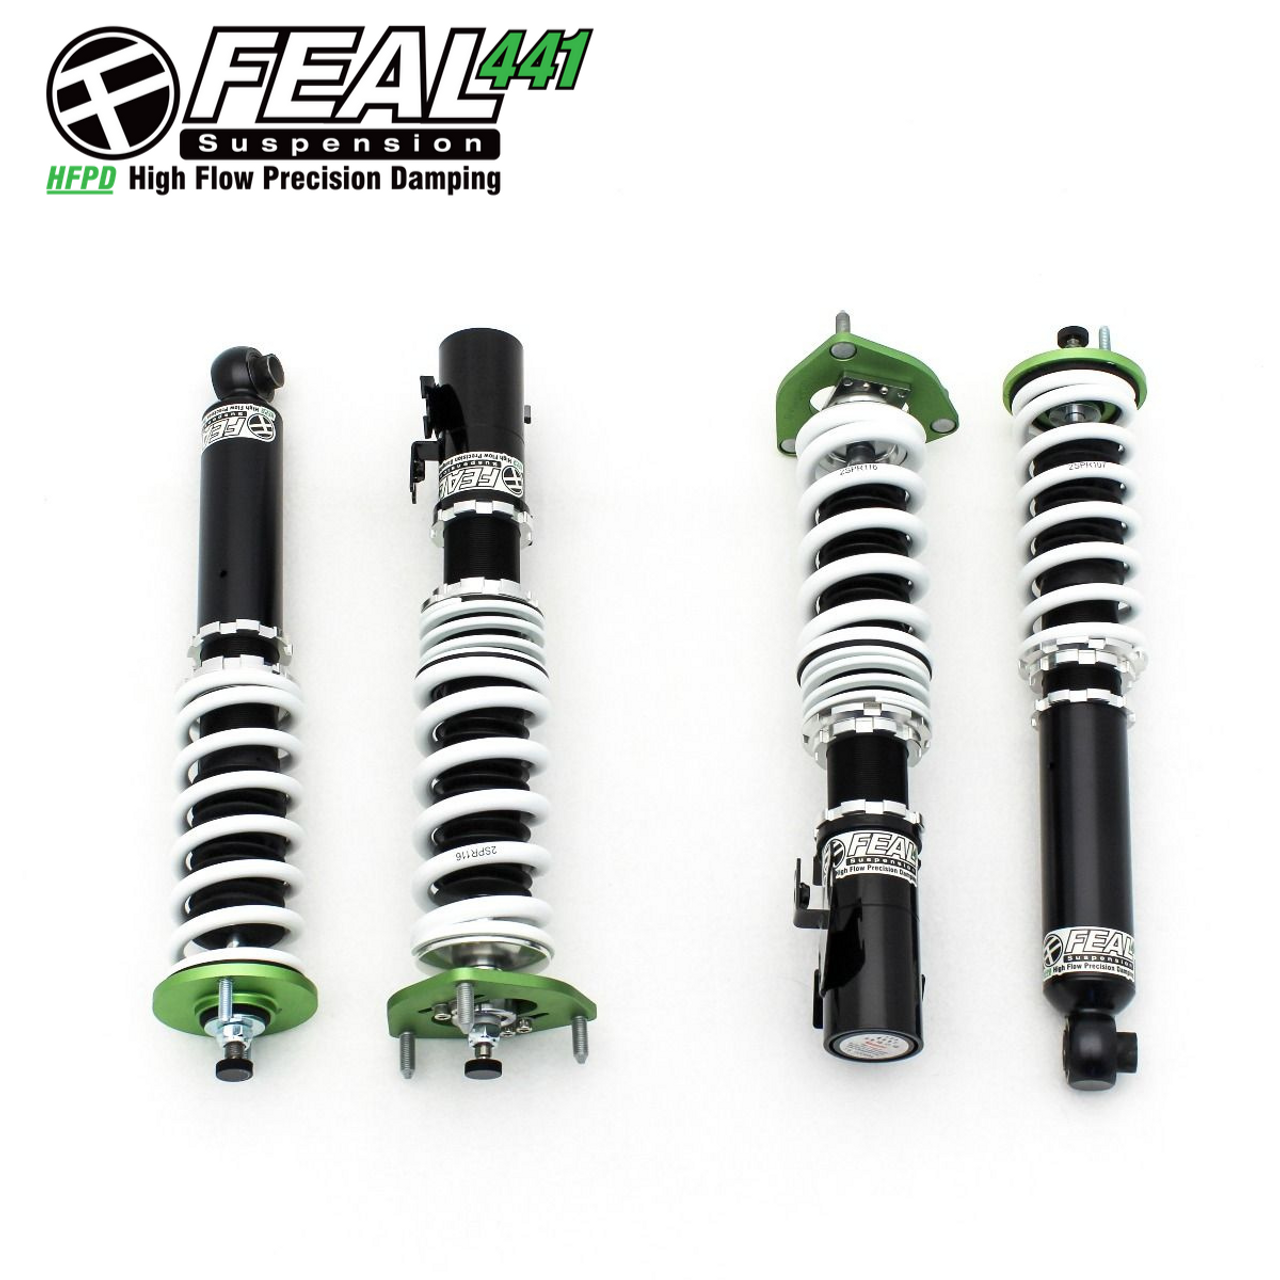 Feal Suspension 441 Coilover Kit, AWD - Nissan R34 GT-R